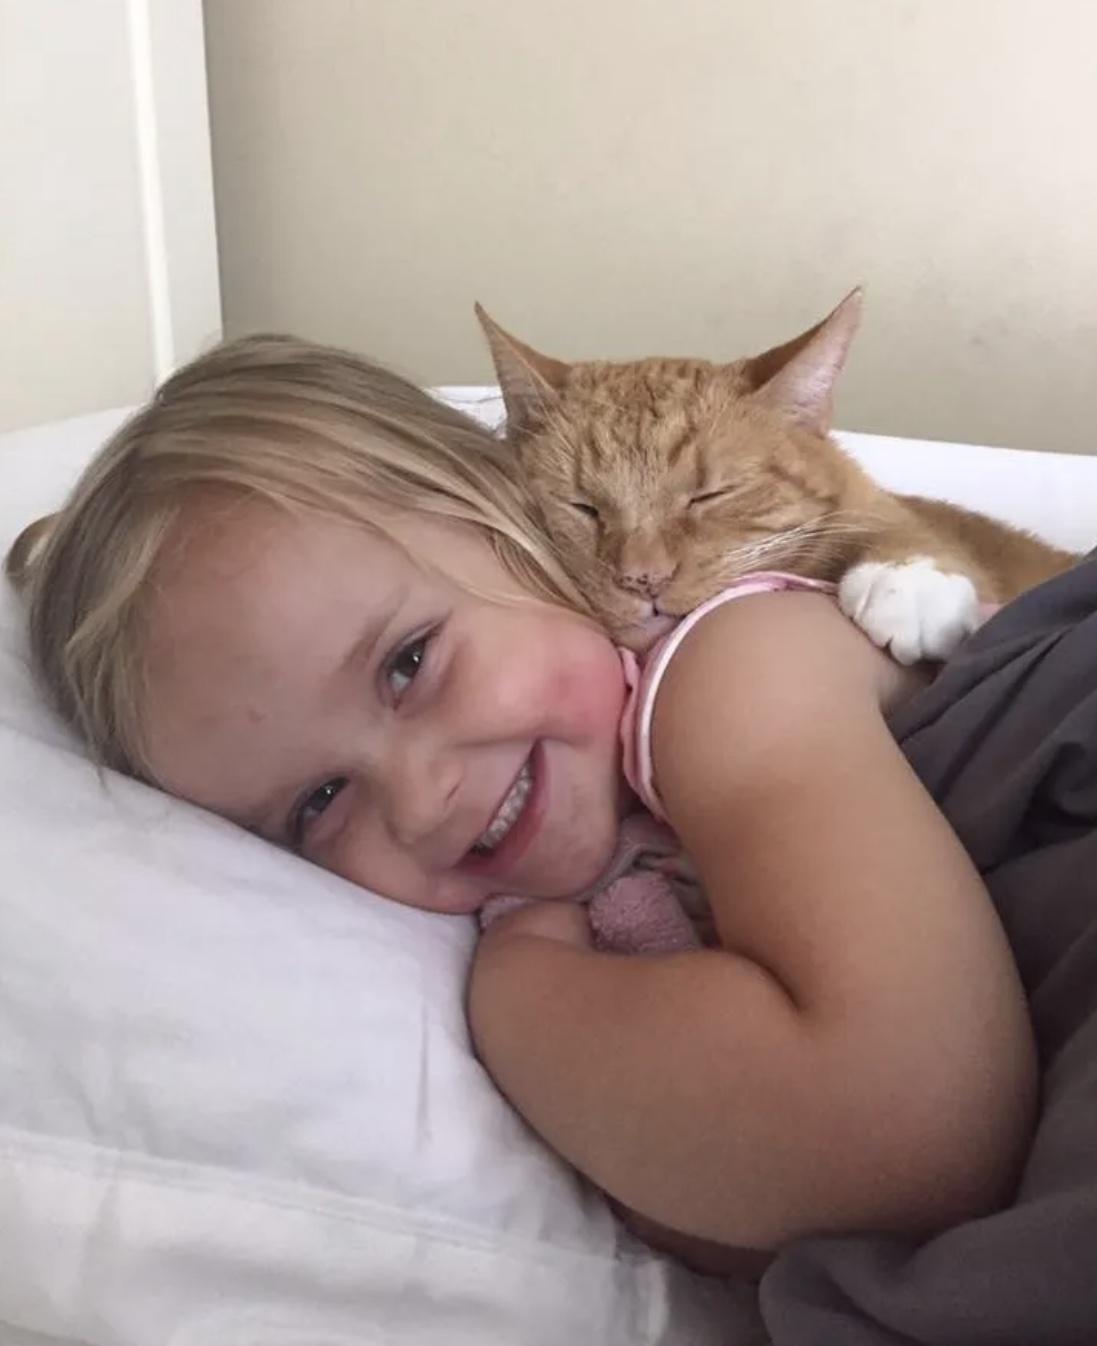 Little Daughter Sings to Her Cat as He Passes Away, But Their Unique Bond Continues